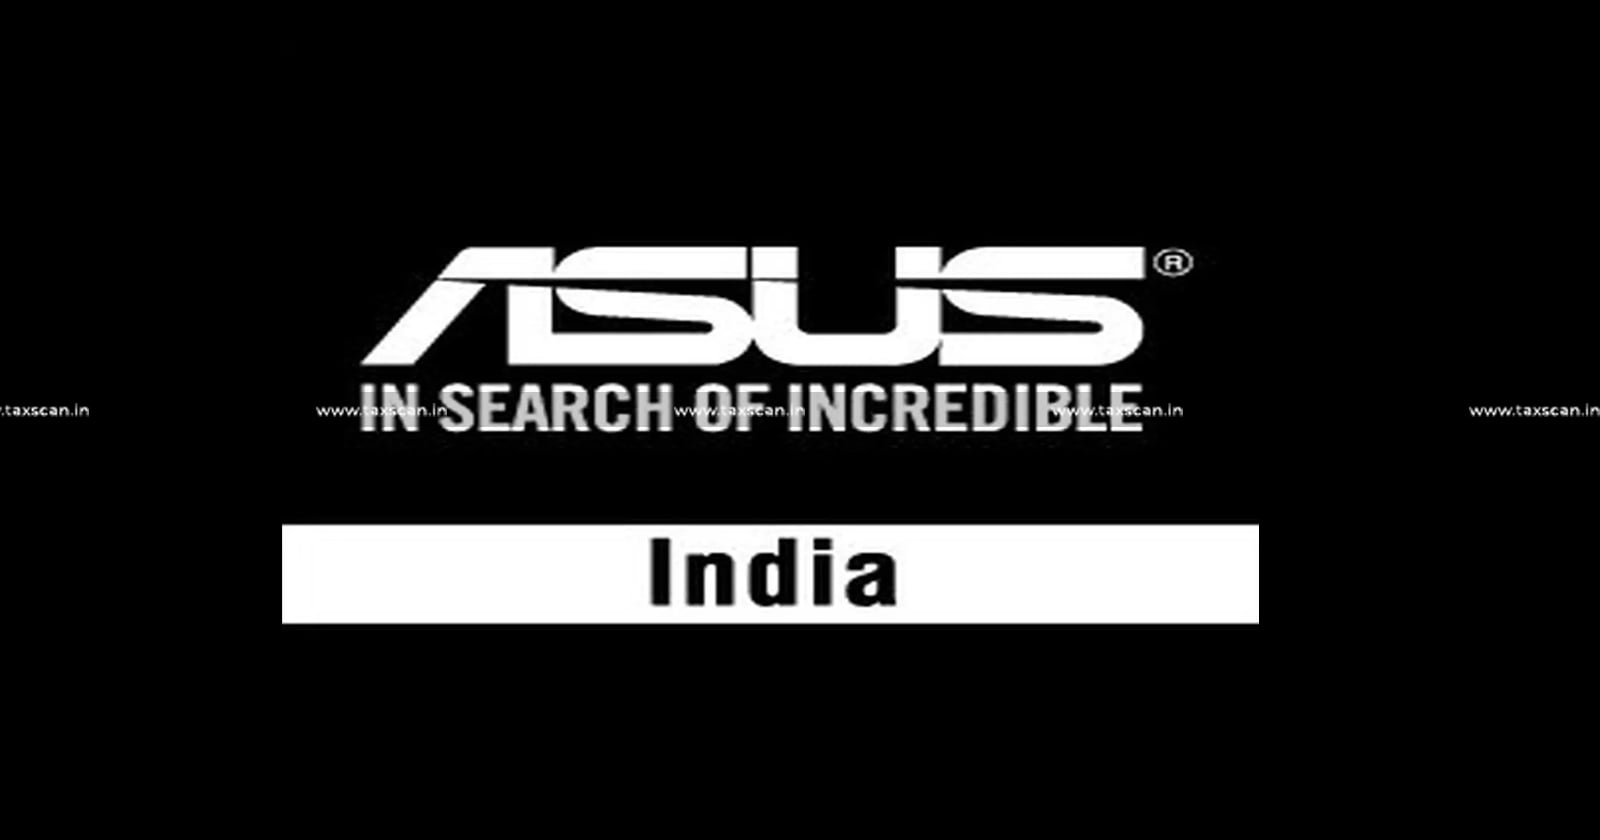 Relief to Asus India - Asus India - ITAT - assessment order - ITAT quashes assessment order - Income Tax Act - Income Tax Act due to barred by limitation - taxscan